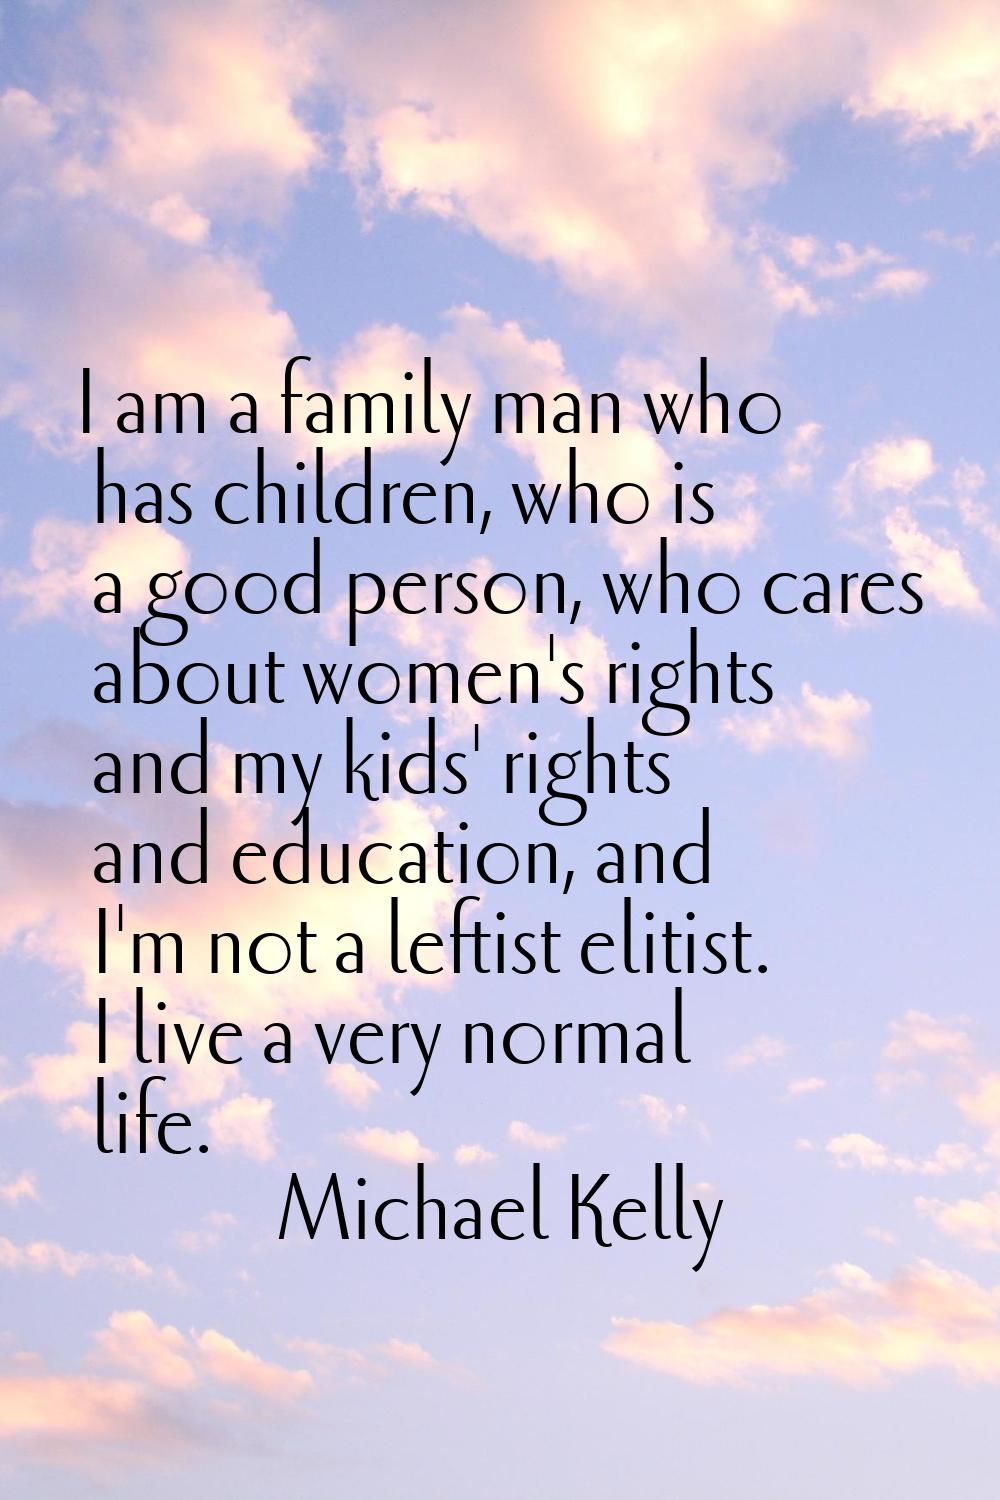 I am a family man who has children, who is a good person, who cares about women's rights and my kid